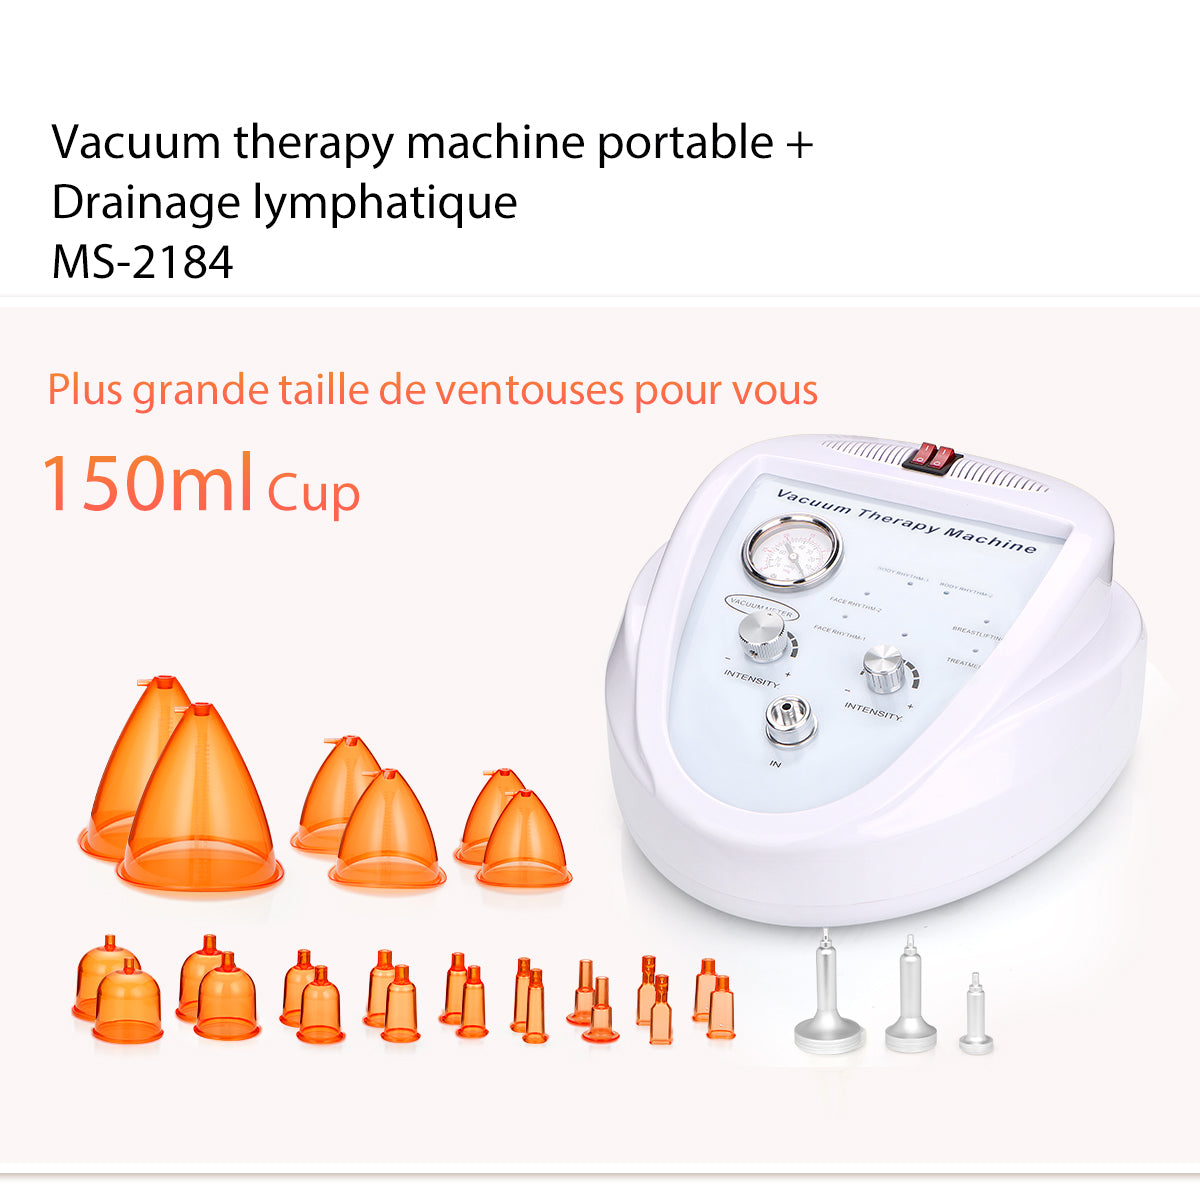 Vacuum therapy machine portable MS-2184